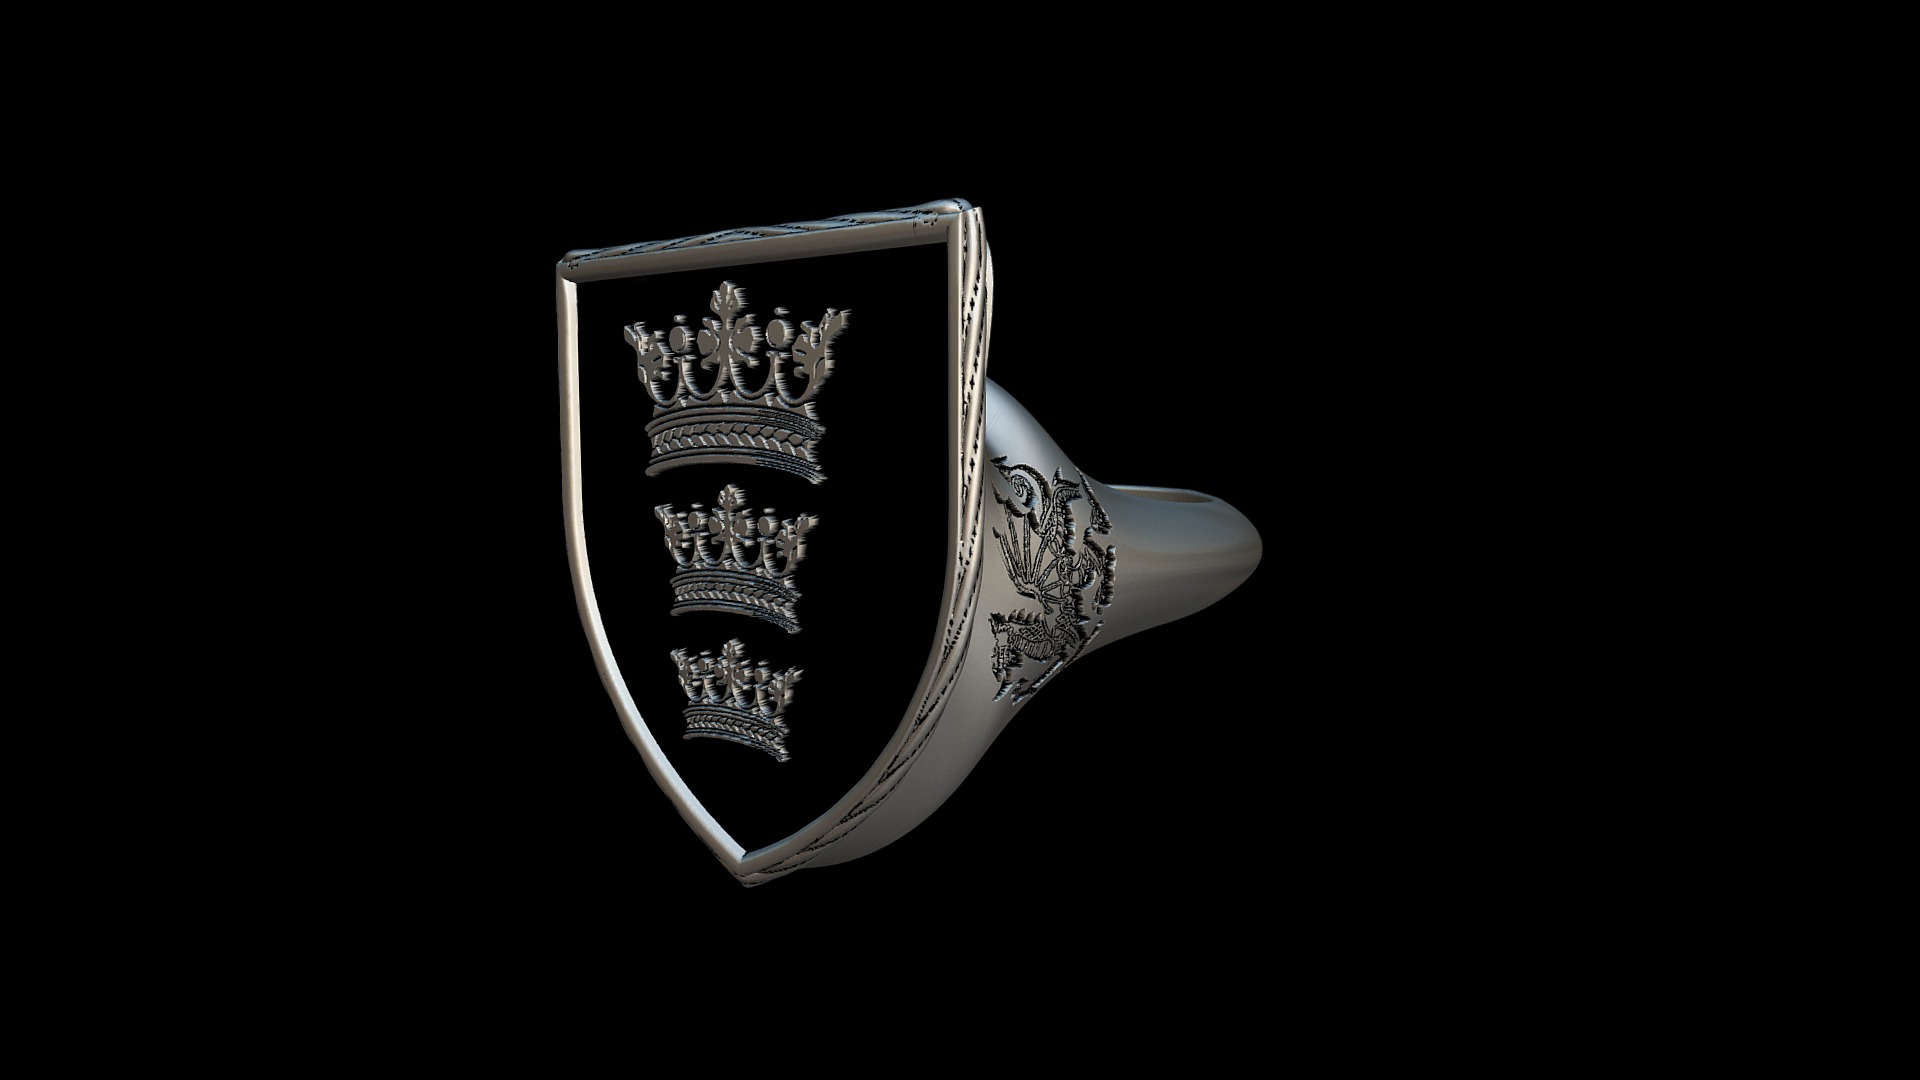 3D model King’s Arthur coat of arms ring - This is a 3D model of the King's Arthur coat of arms ring. The 3D model is about a glass with a design on it.